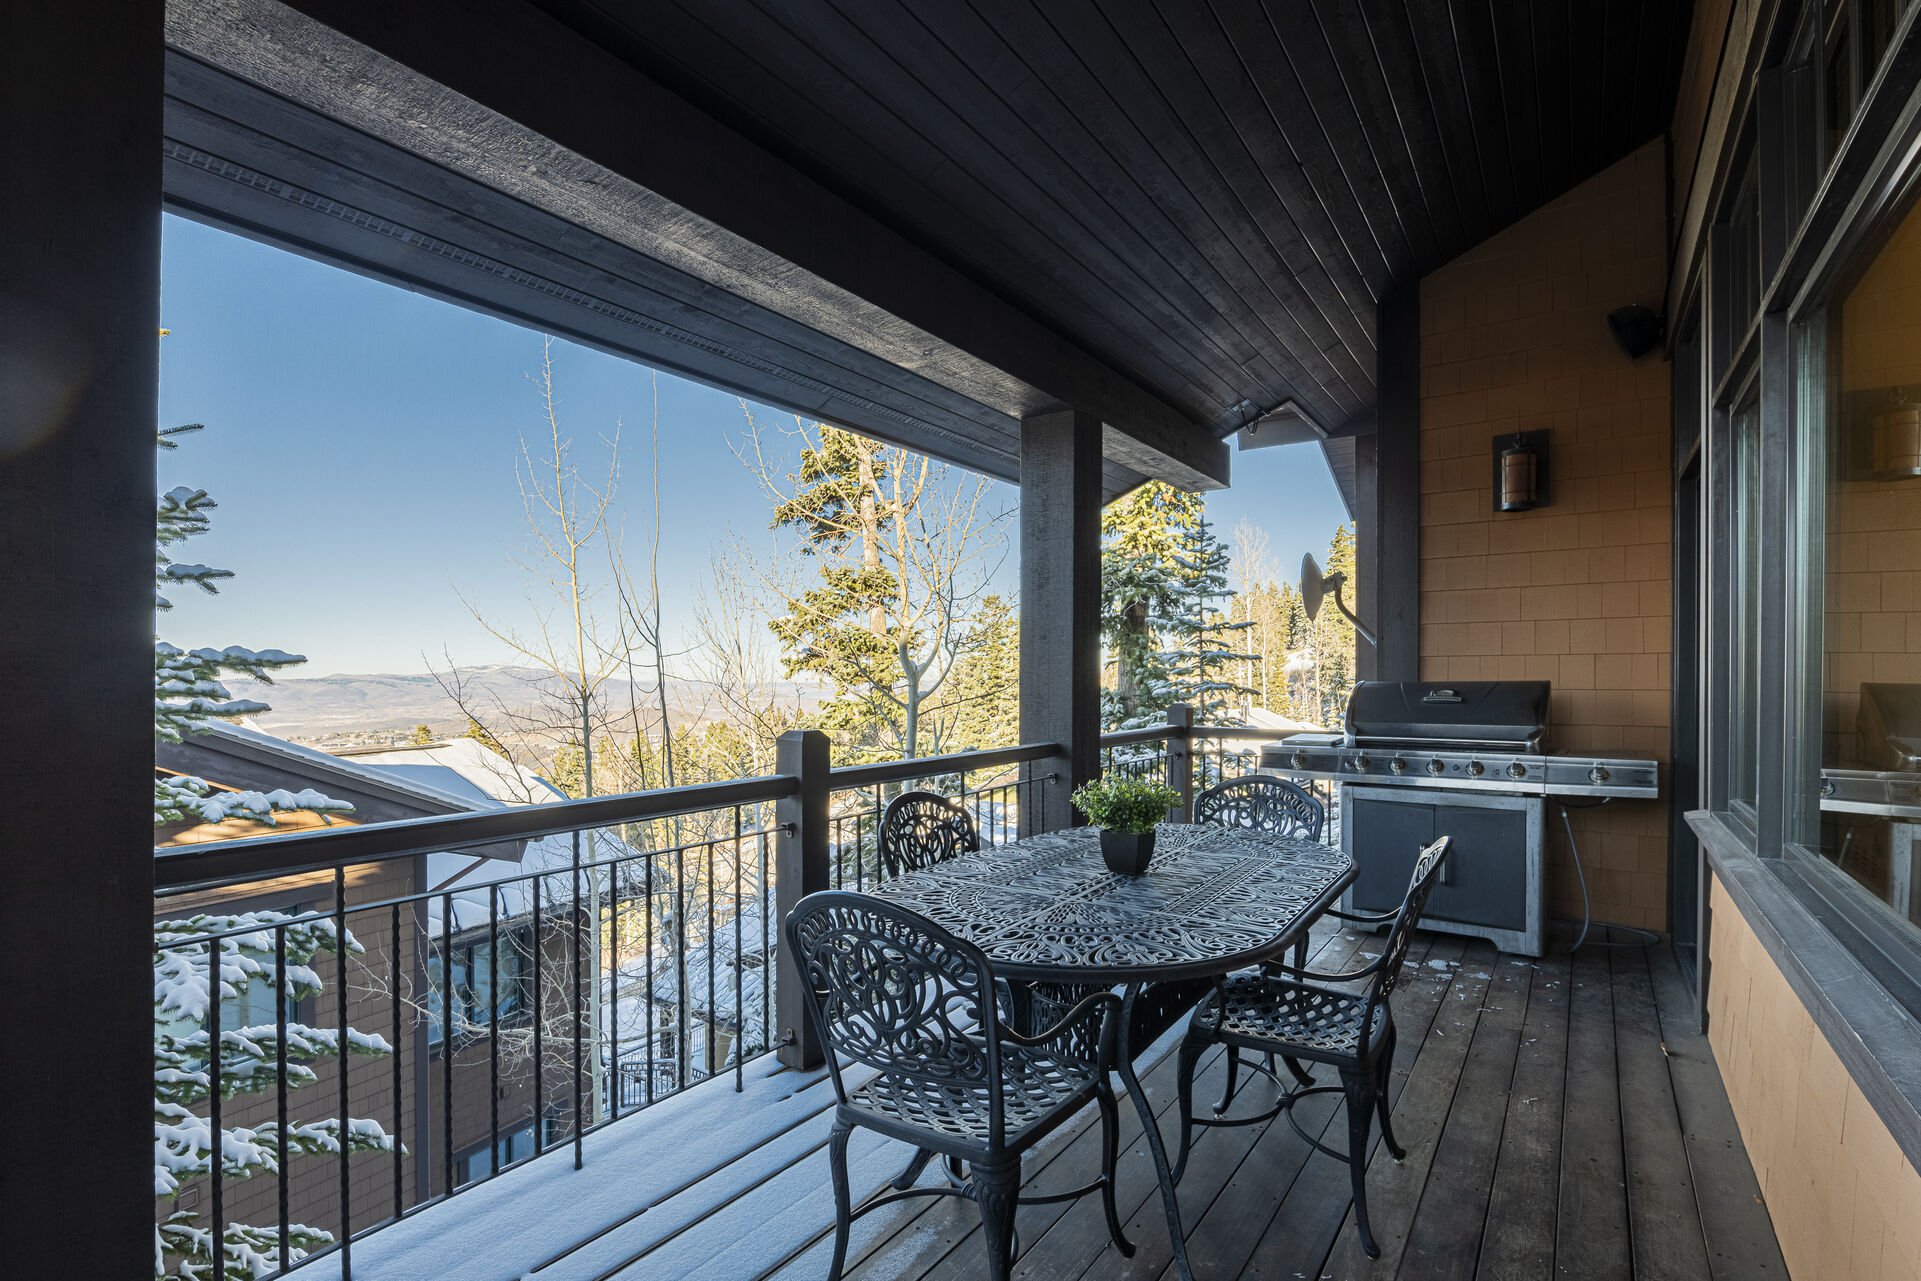 Main Level Deck with Patio Seating, a BBQ Grill and Stunning Views